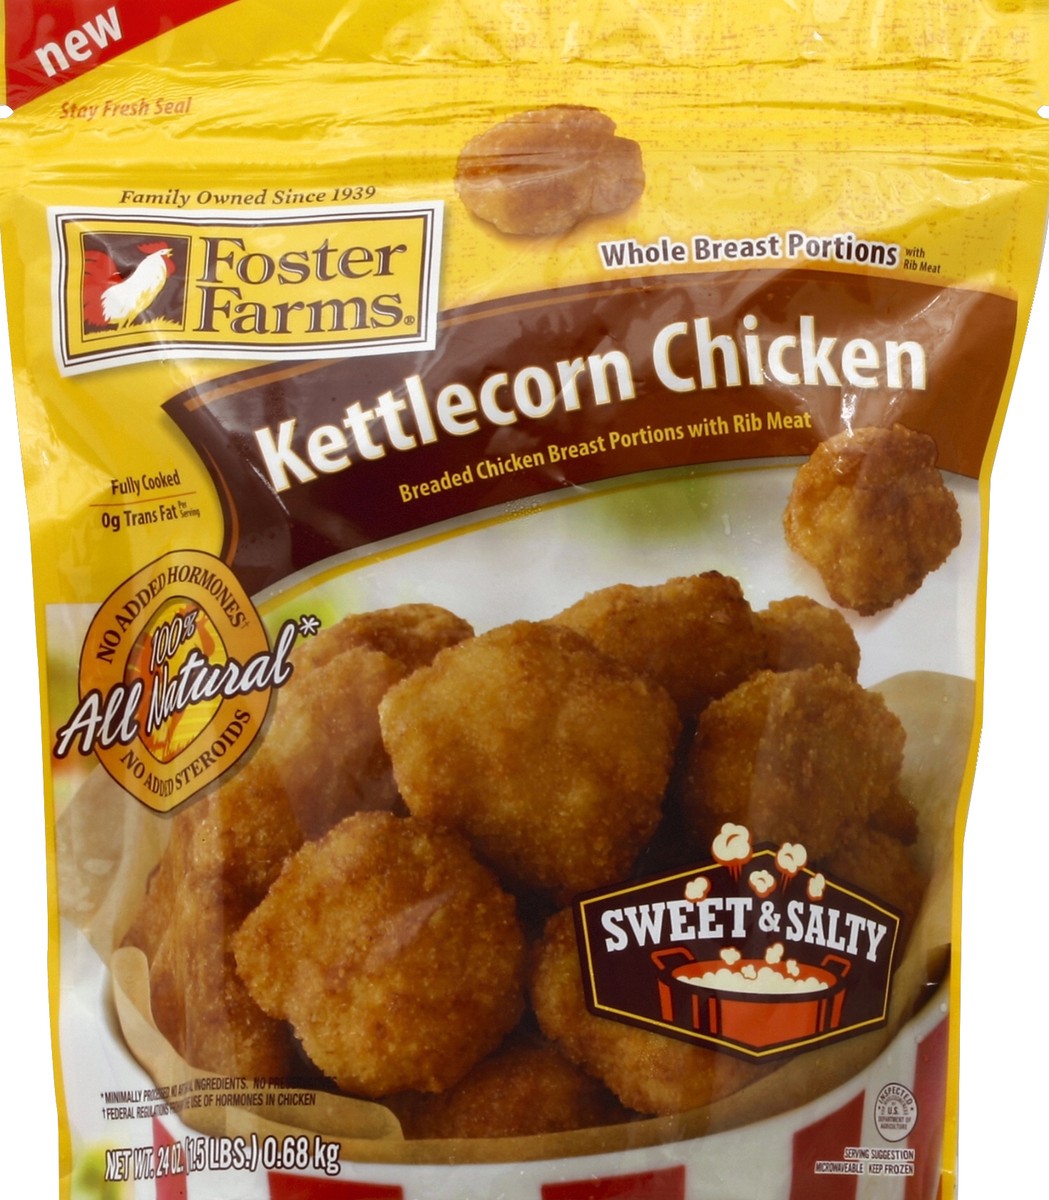 slide 3 of 3, Foster Farms Kettlecorn Chicken Sweet and Salty, 24 oz